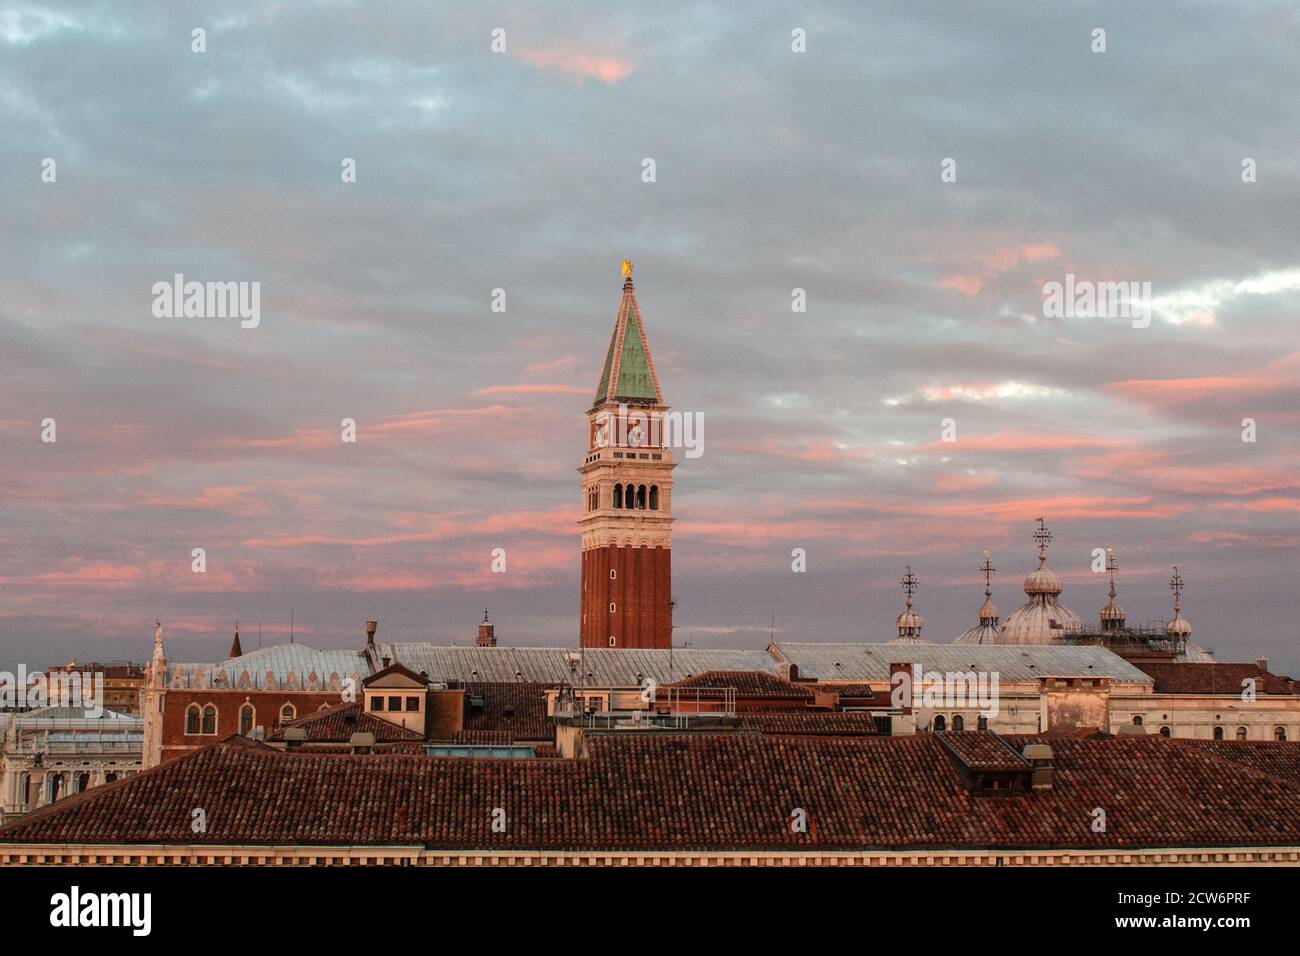 VENICE, ITALY - FEBRUARY 26 2017:  A view of sunrise from the roof of Venice, Italy with San Marco's bell tower in the middle Stock Photo